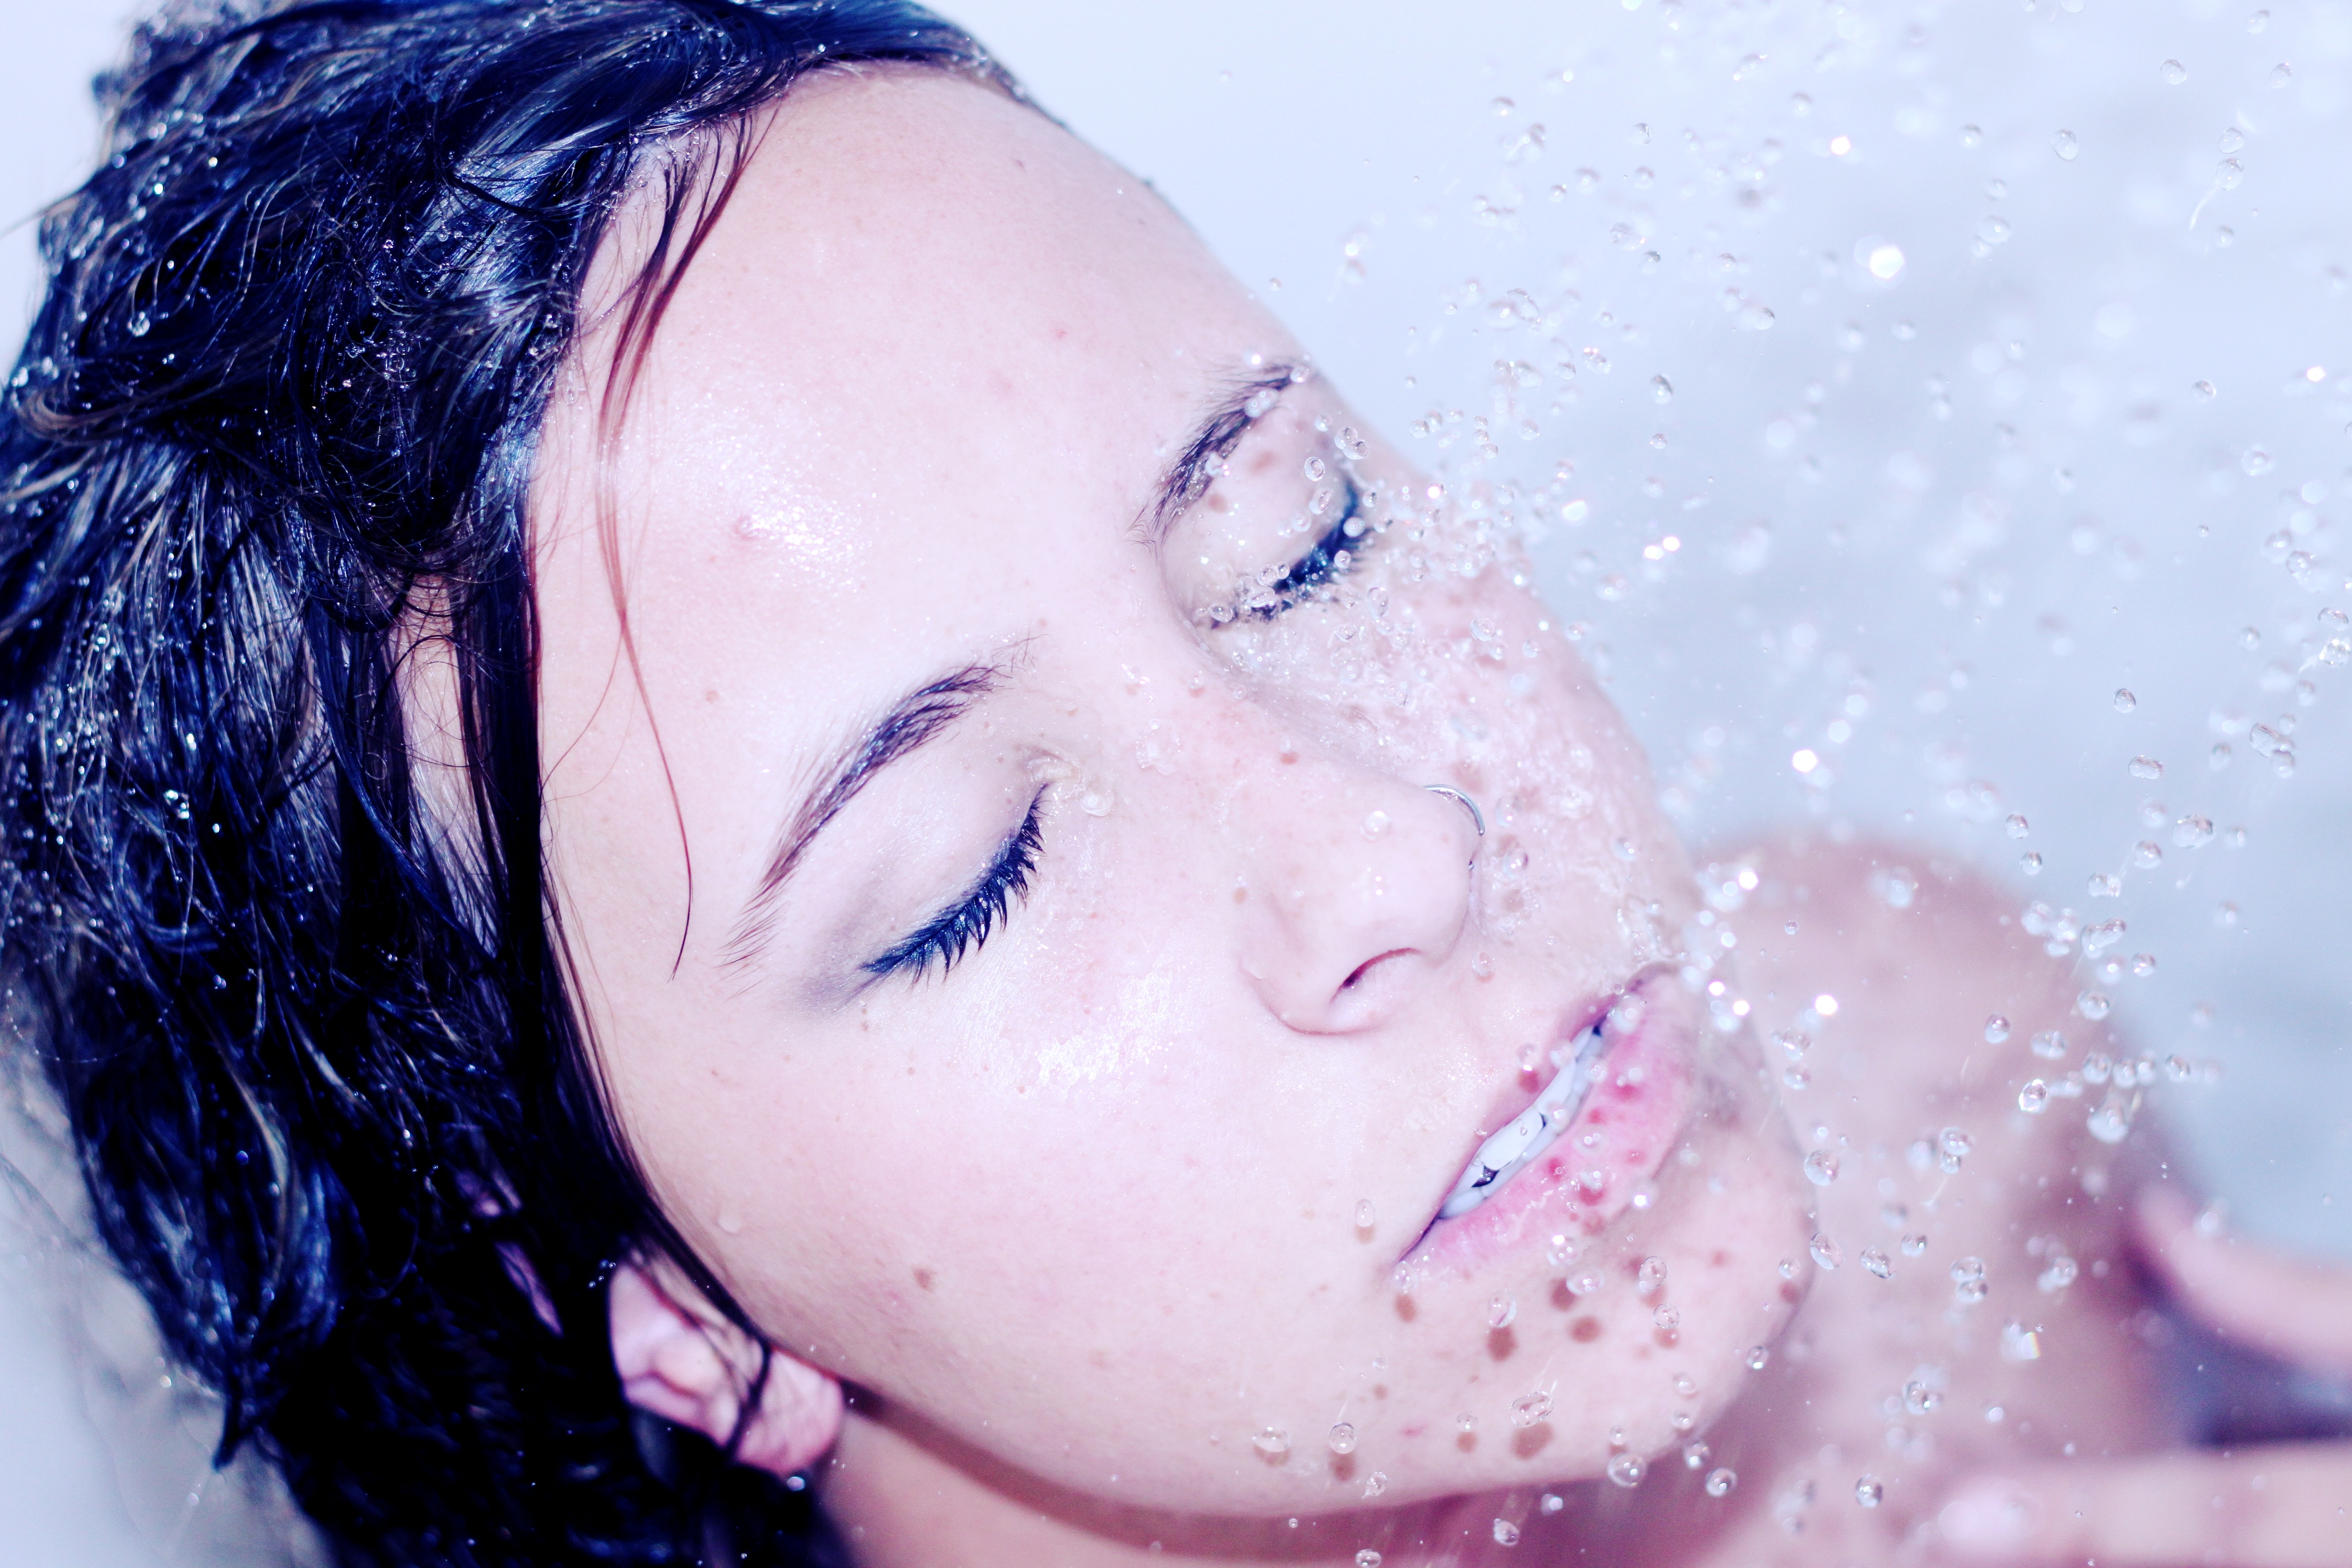 Woman Taking a Shower, Adult, Portrait, Wet, Water, HQ Photo